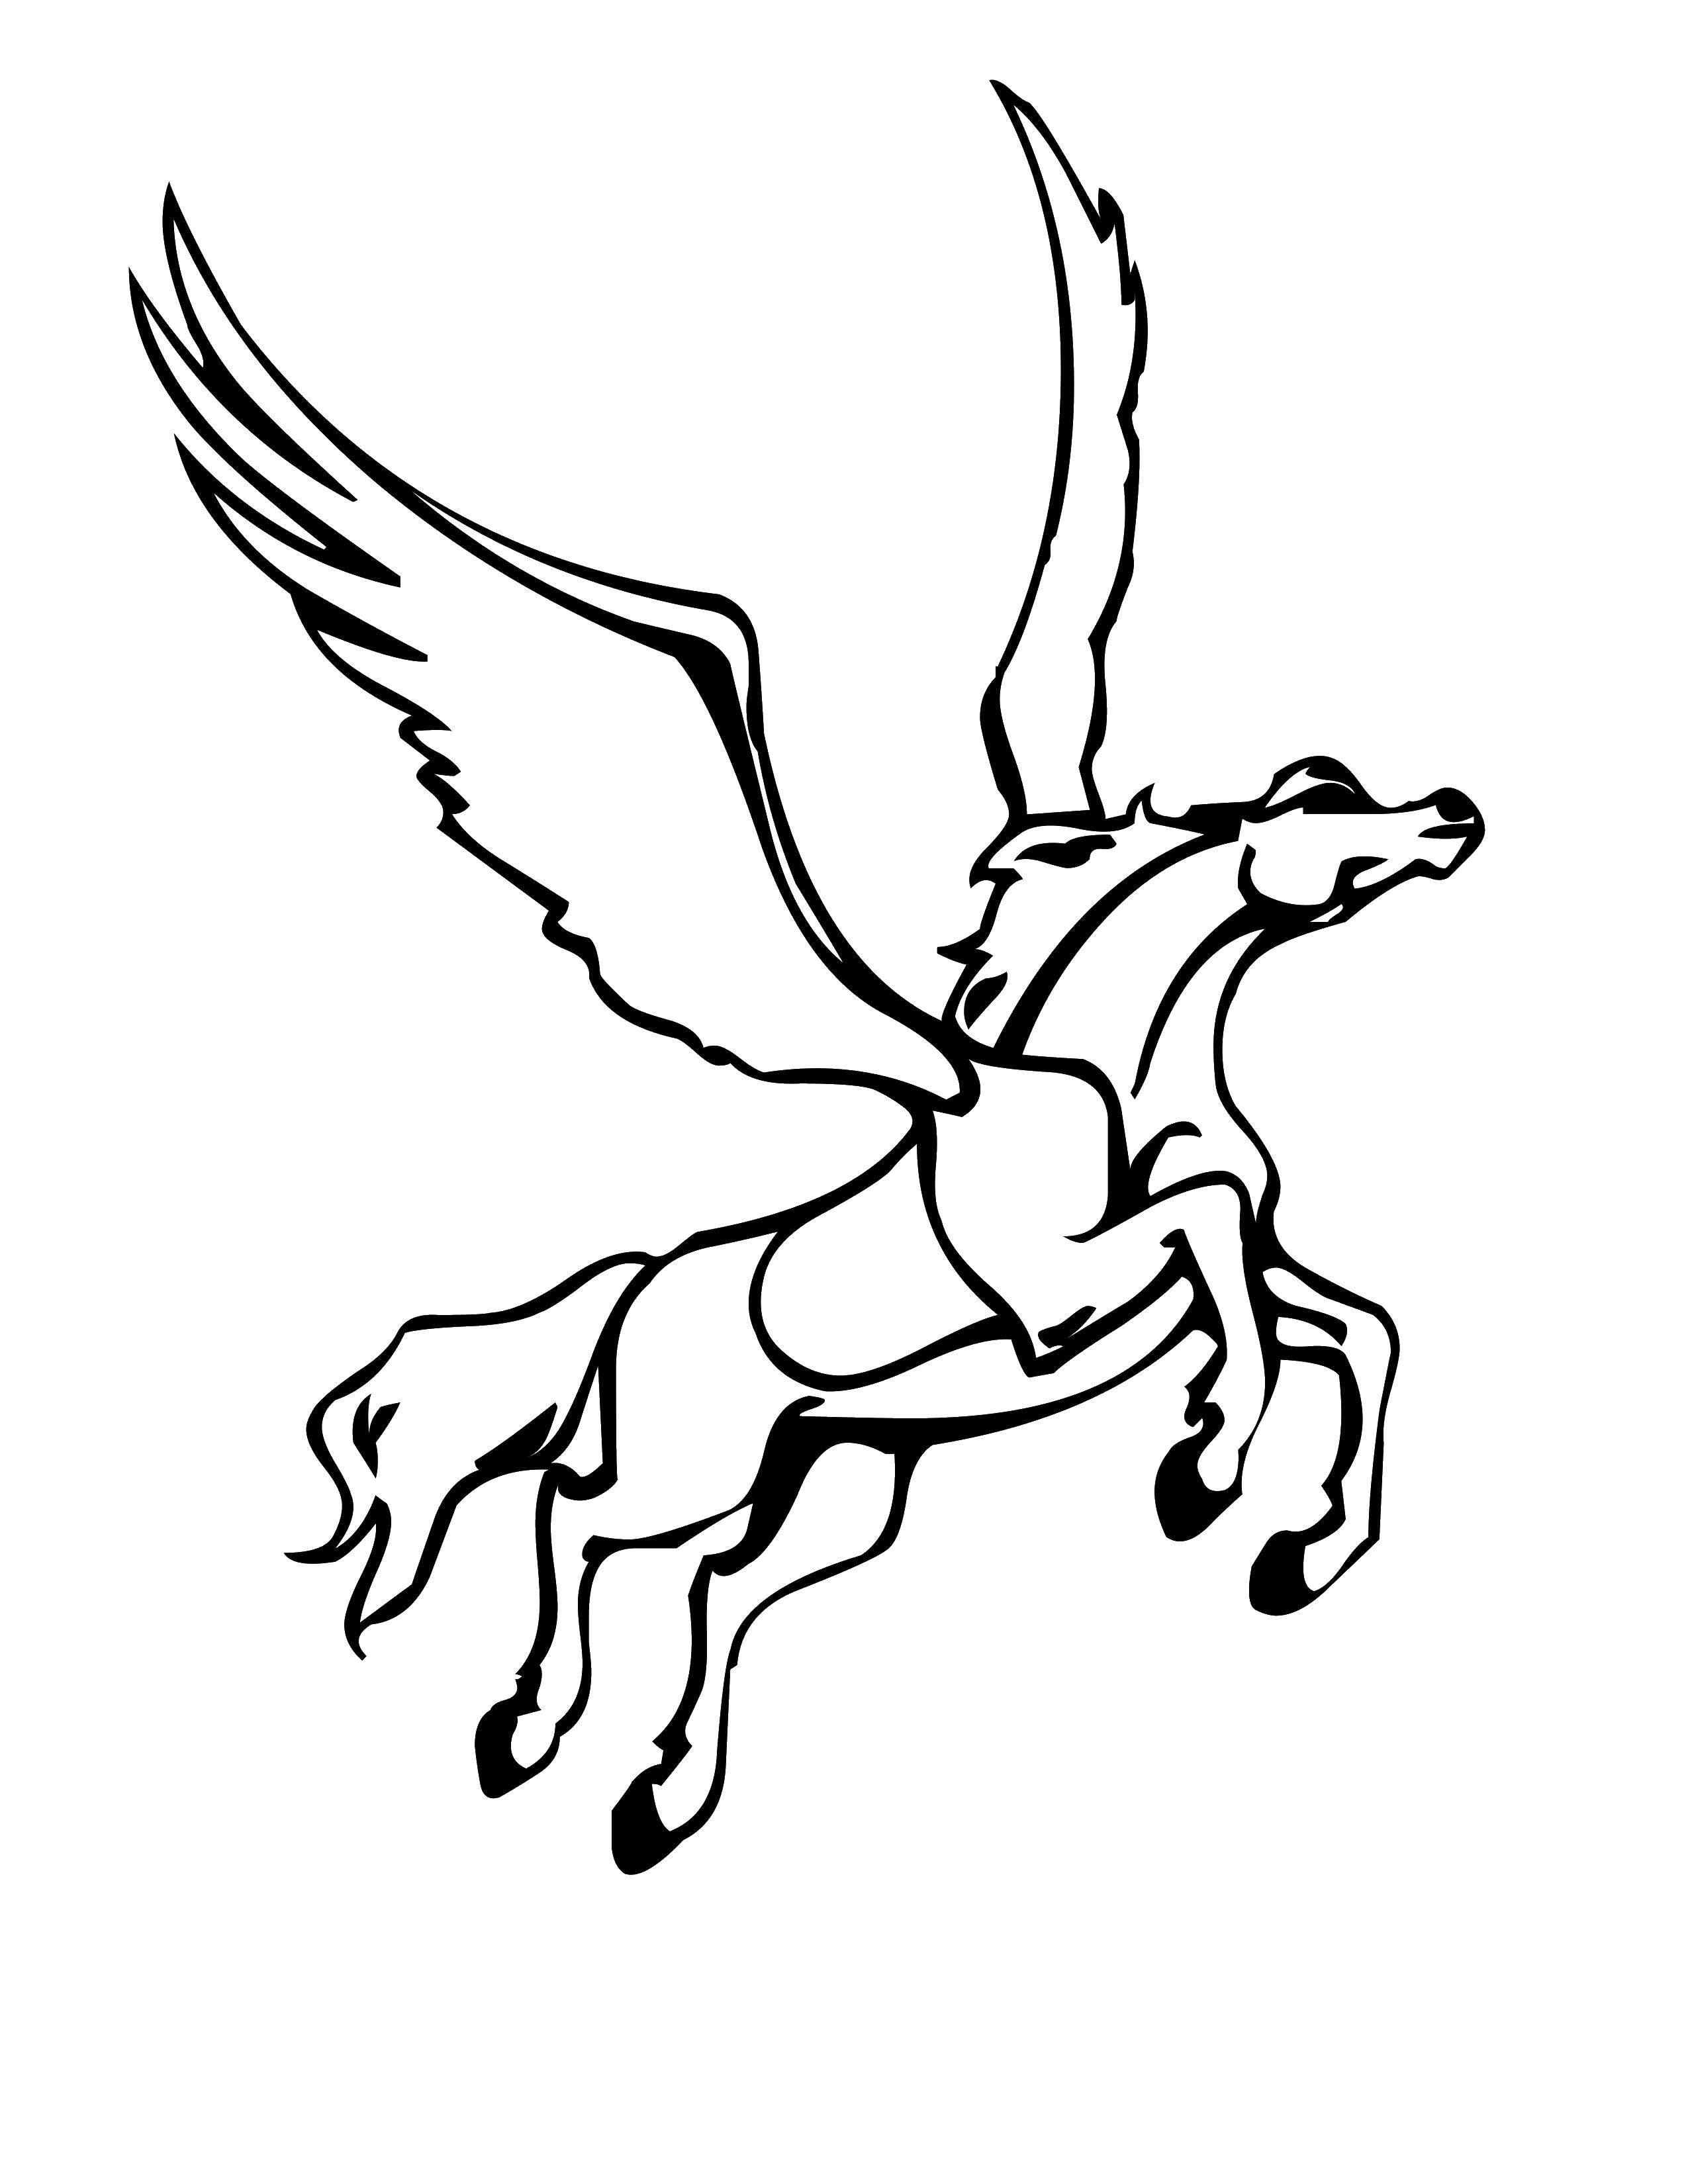 Coloring Pegasus with wings. Category coloring. Tags:  horse, wings.